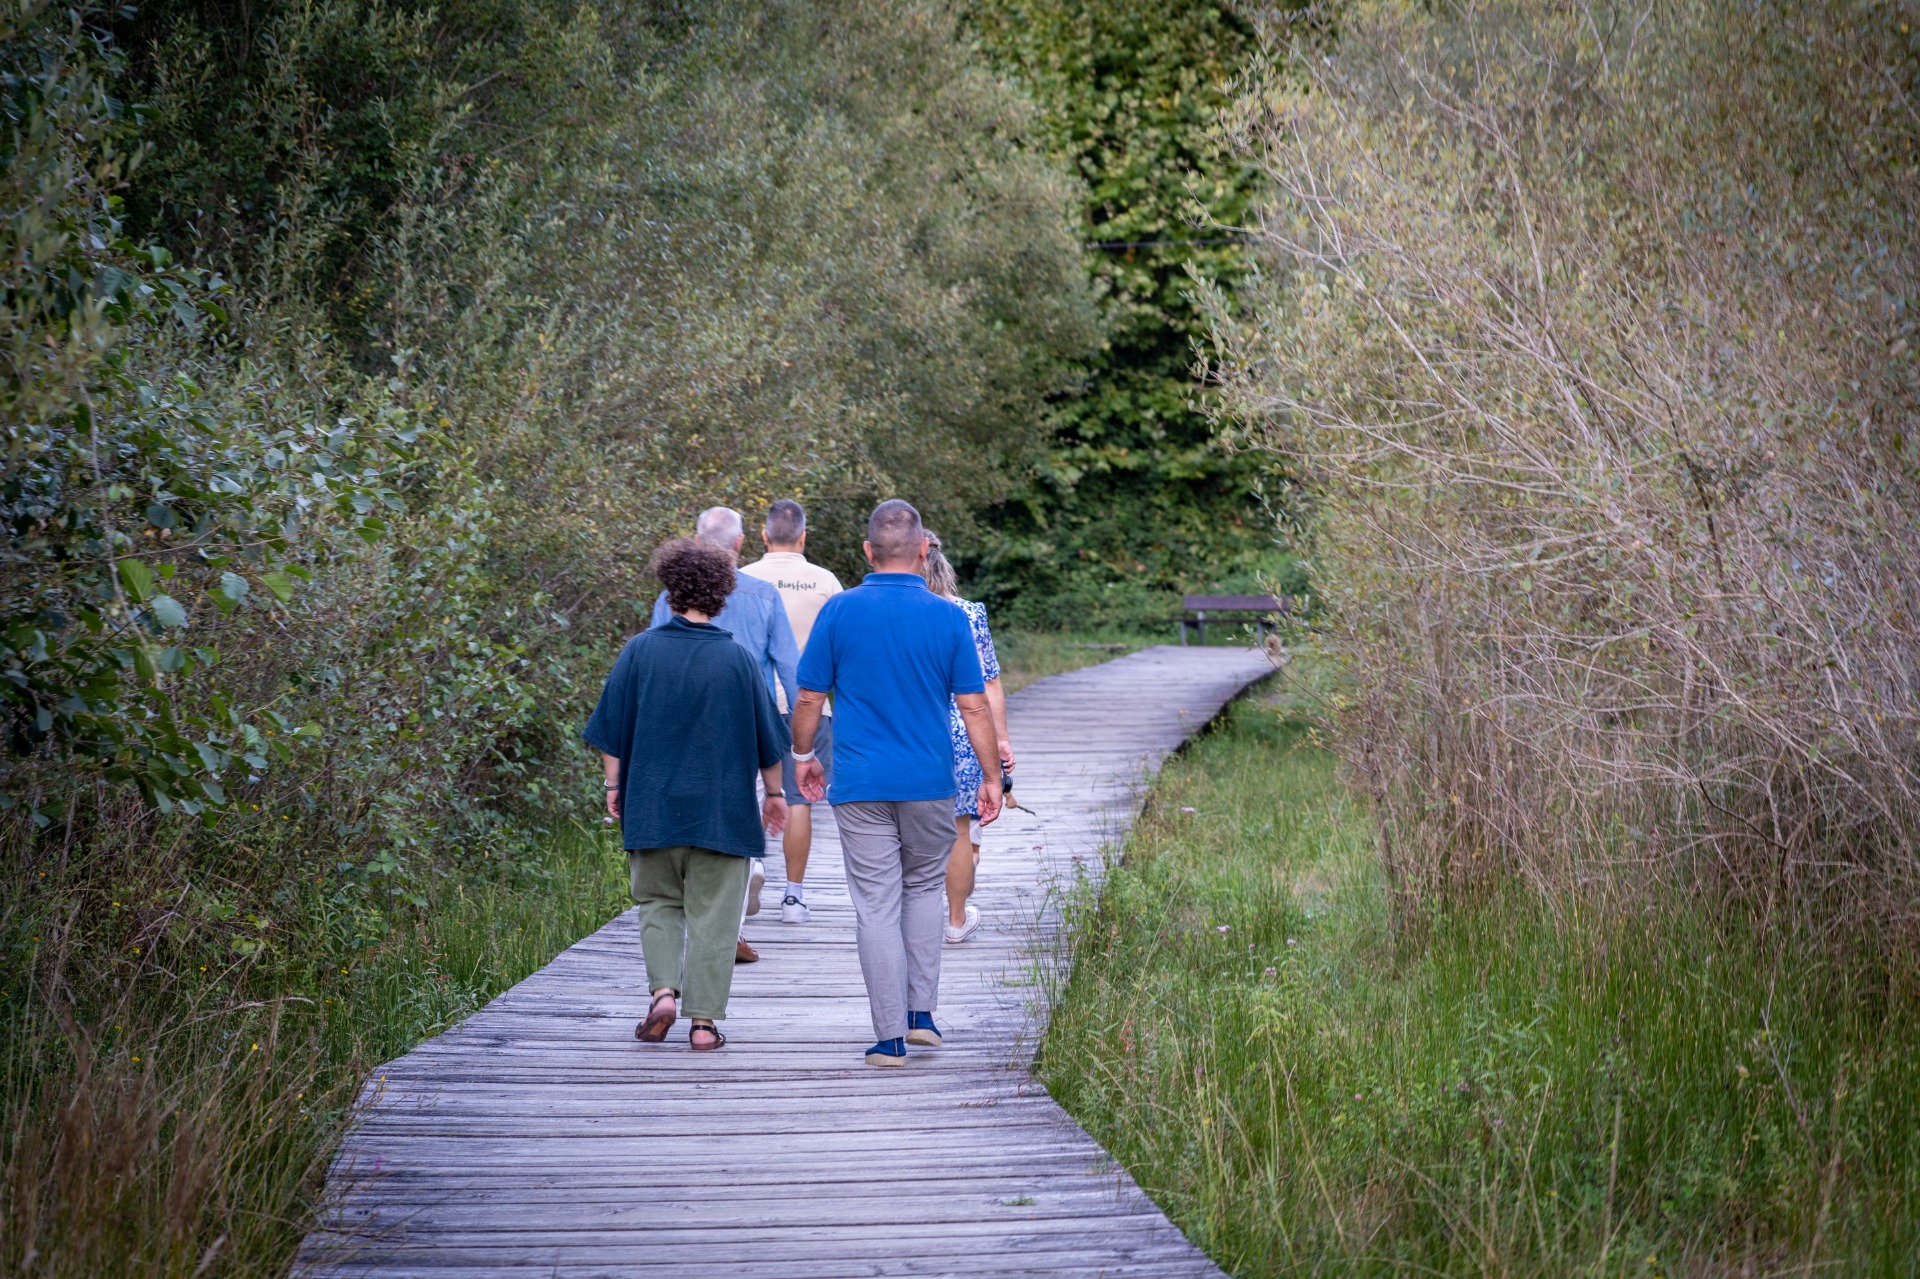  Several people walking along a path between trees